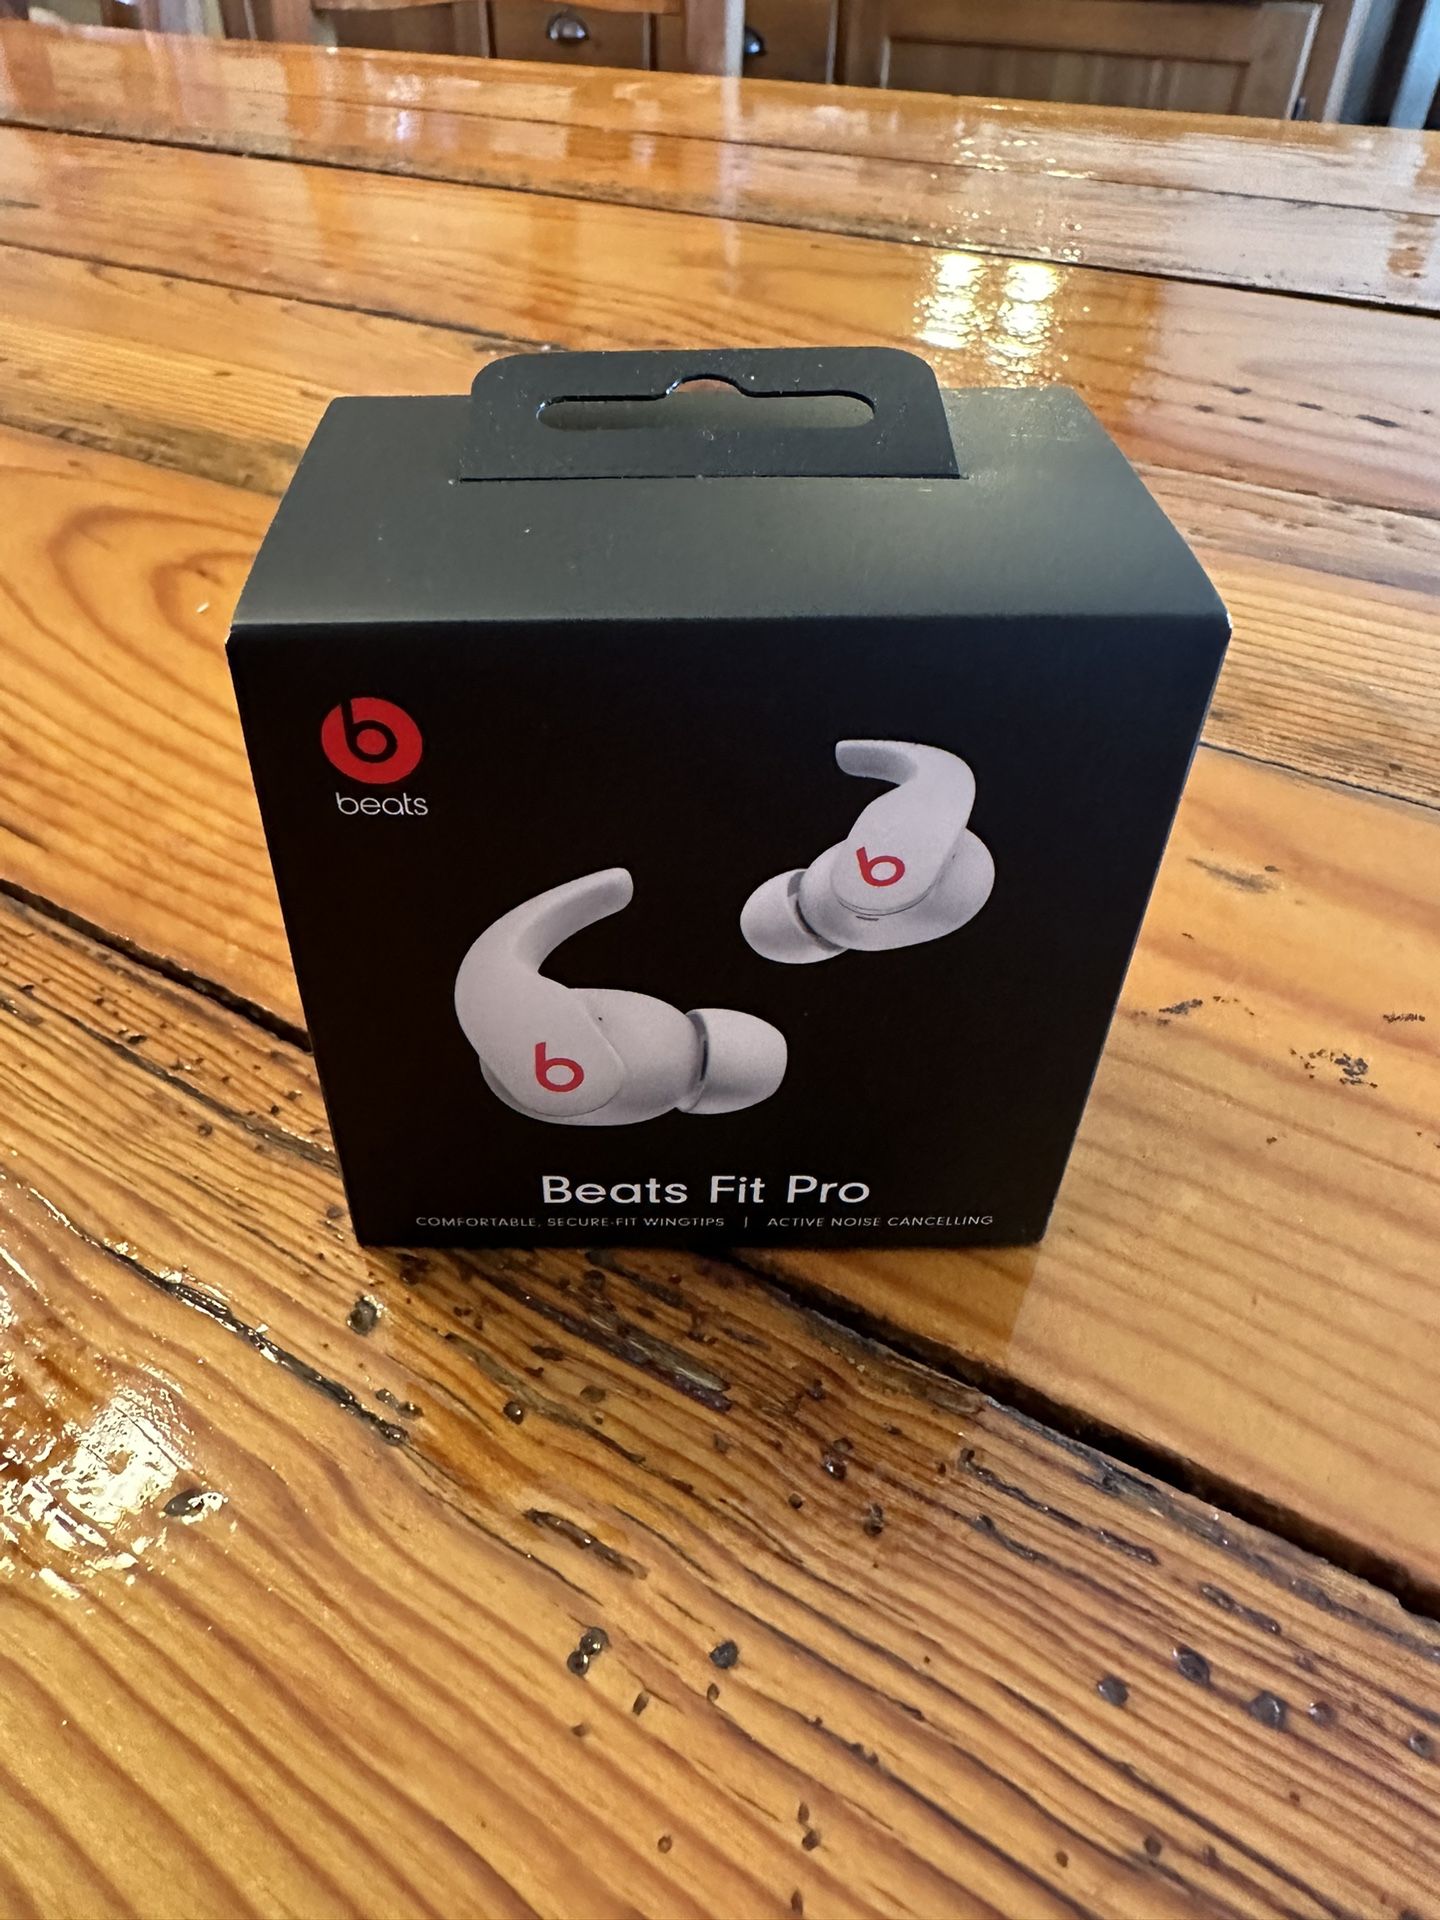 Beats by Dr. Dre - Beats Fit Pro True Wireless Noise Cancelling In-Ear Earbuds - White - SEALED BOX